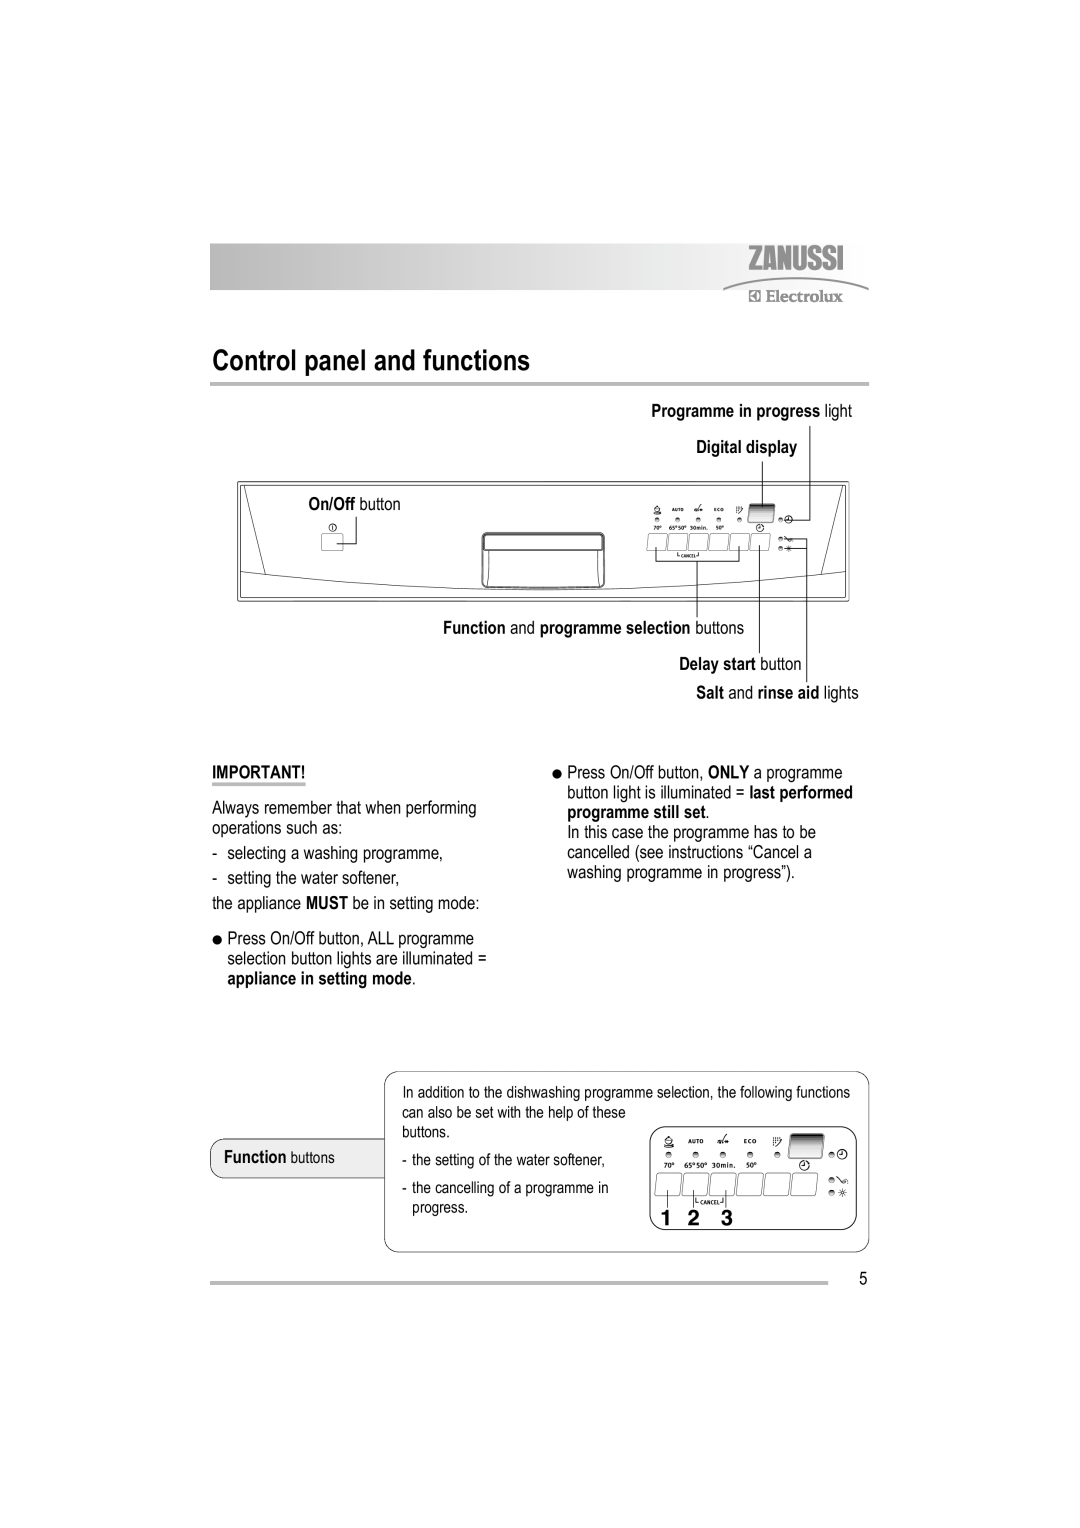 Electrolux ZDF 501 user manual Control panel and functions, Programme in progress light, Digital display, On/Off button 